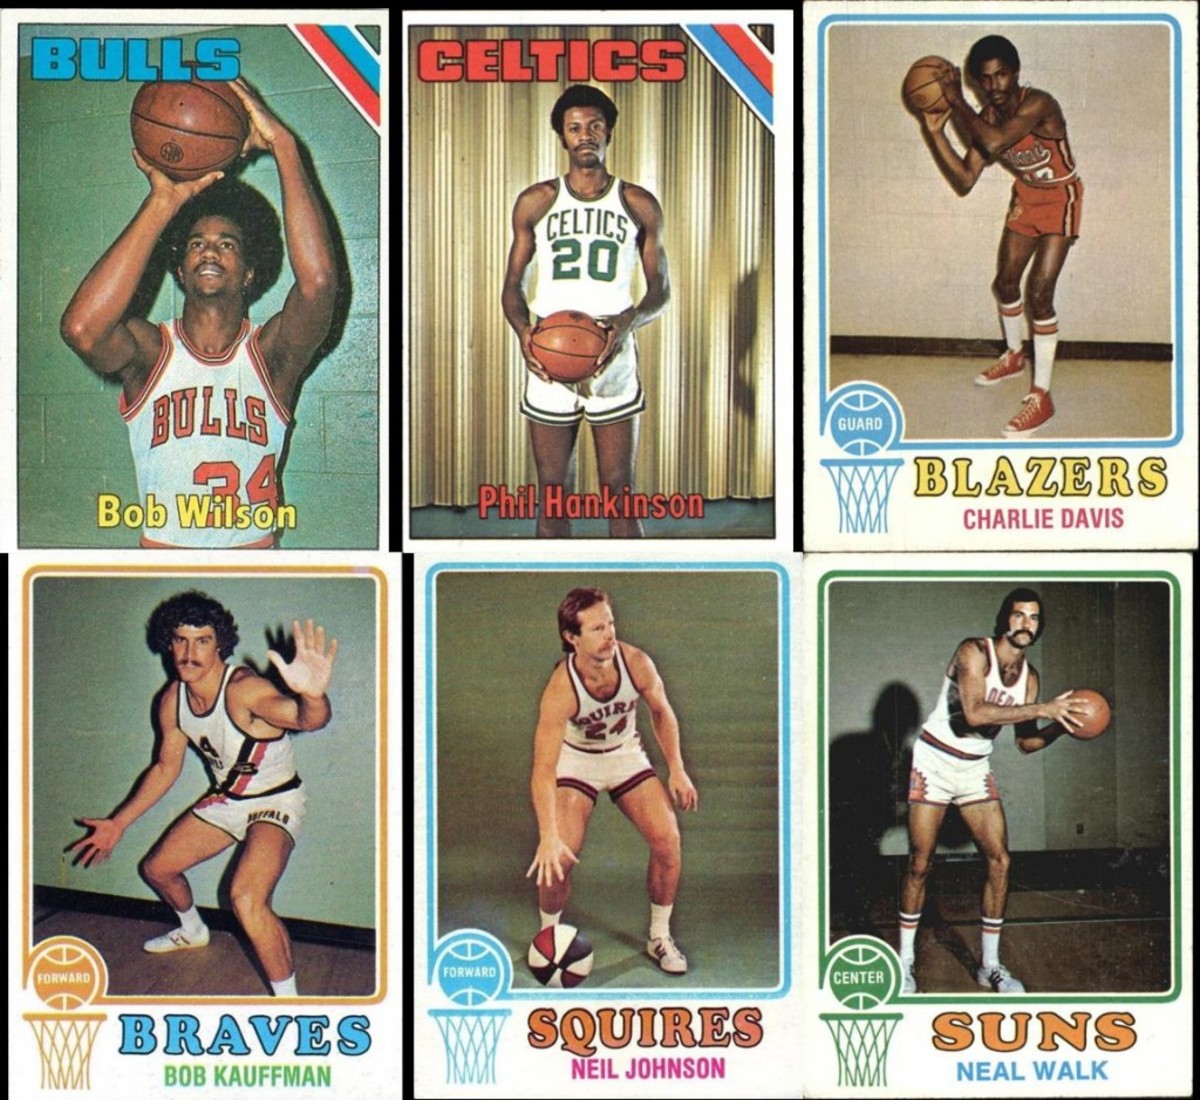 An NBA player who liked to shoot rather than pass was once described as taking shots as he came out of the locker room. Bob Wilson appears to be shooting from the locker room. Other players wind up in odd poses and backgrounds that Jacobs described as the “bathroom photos.”